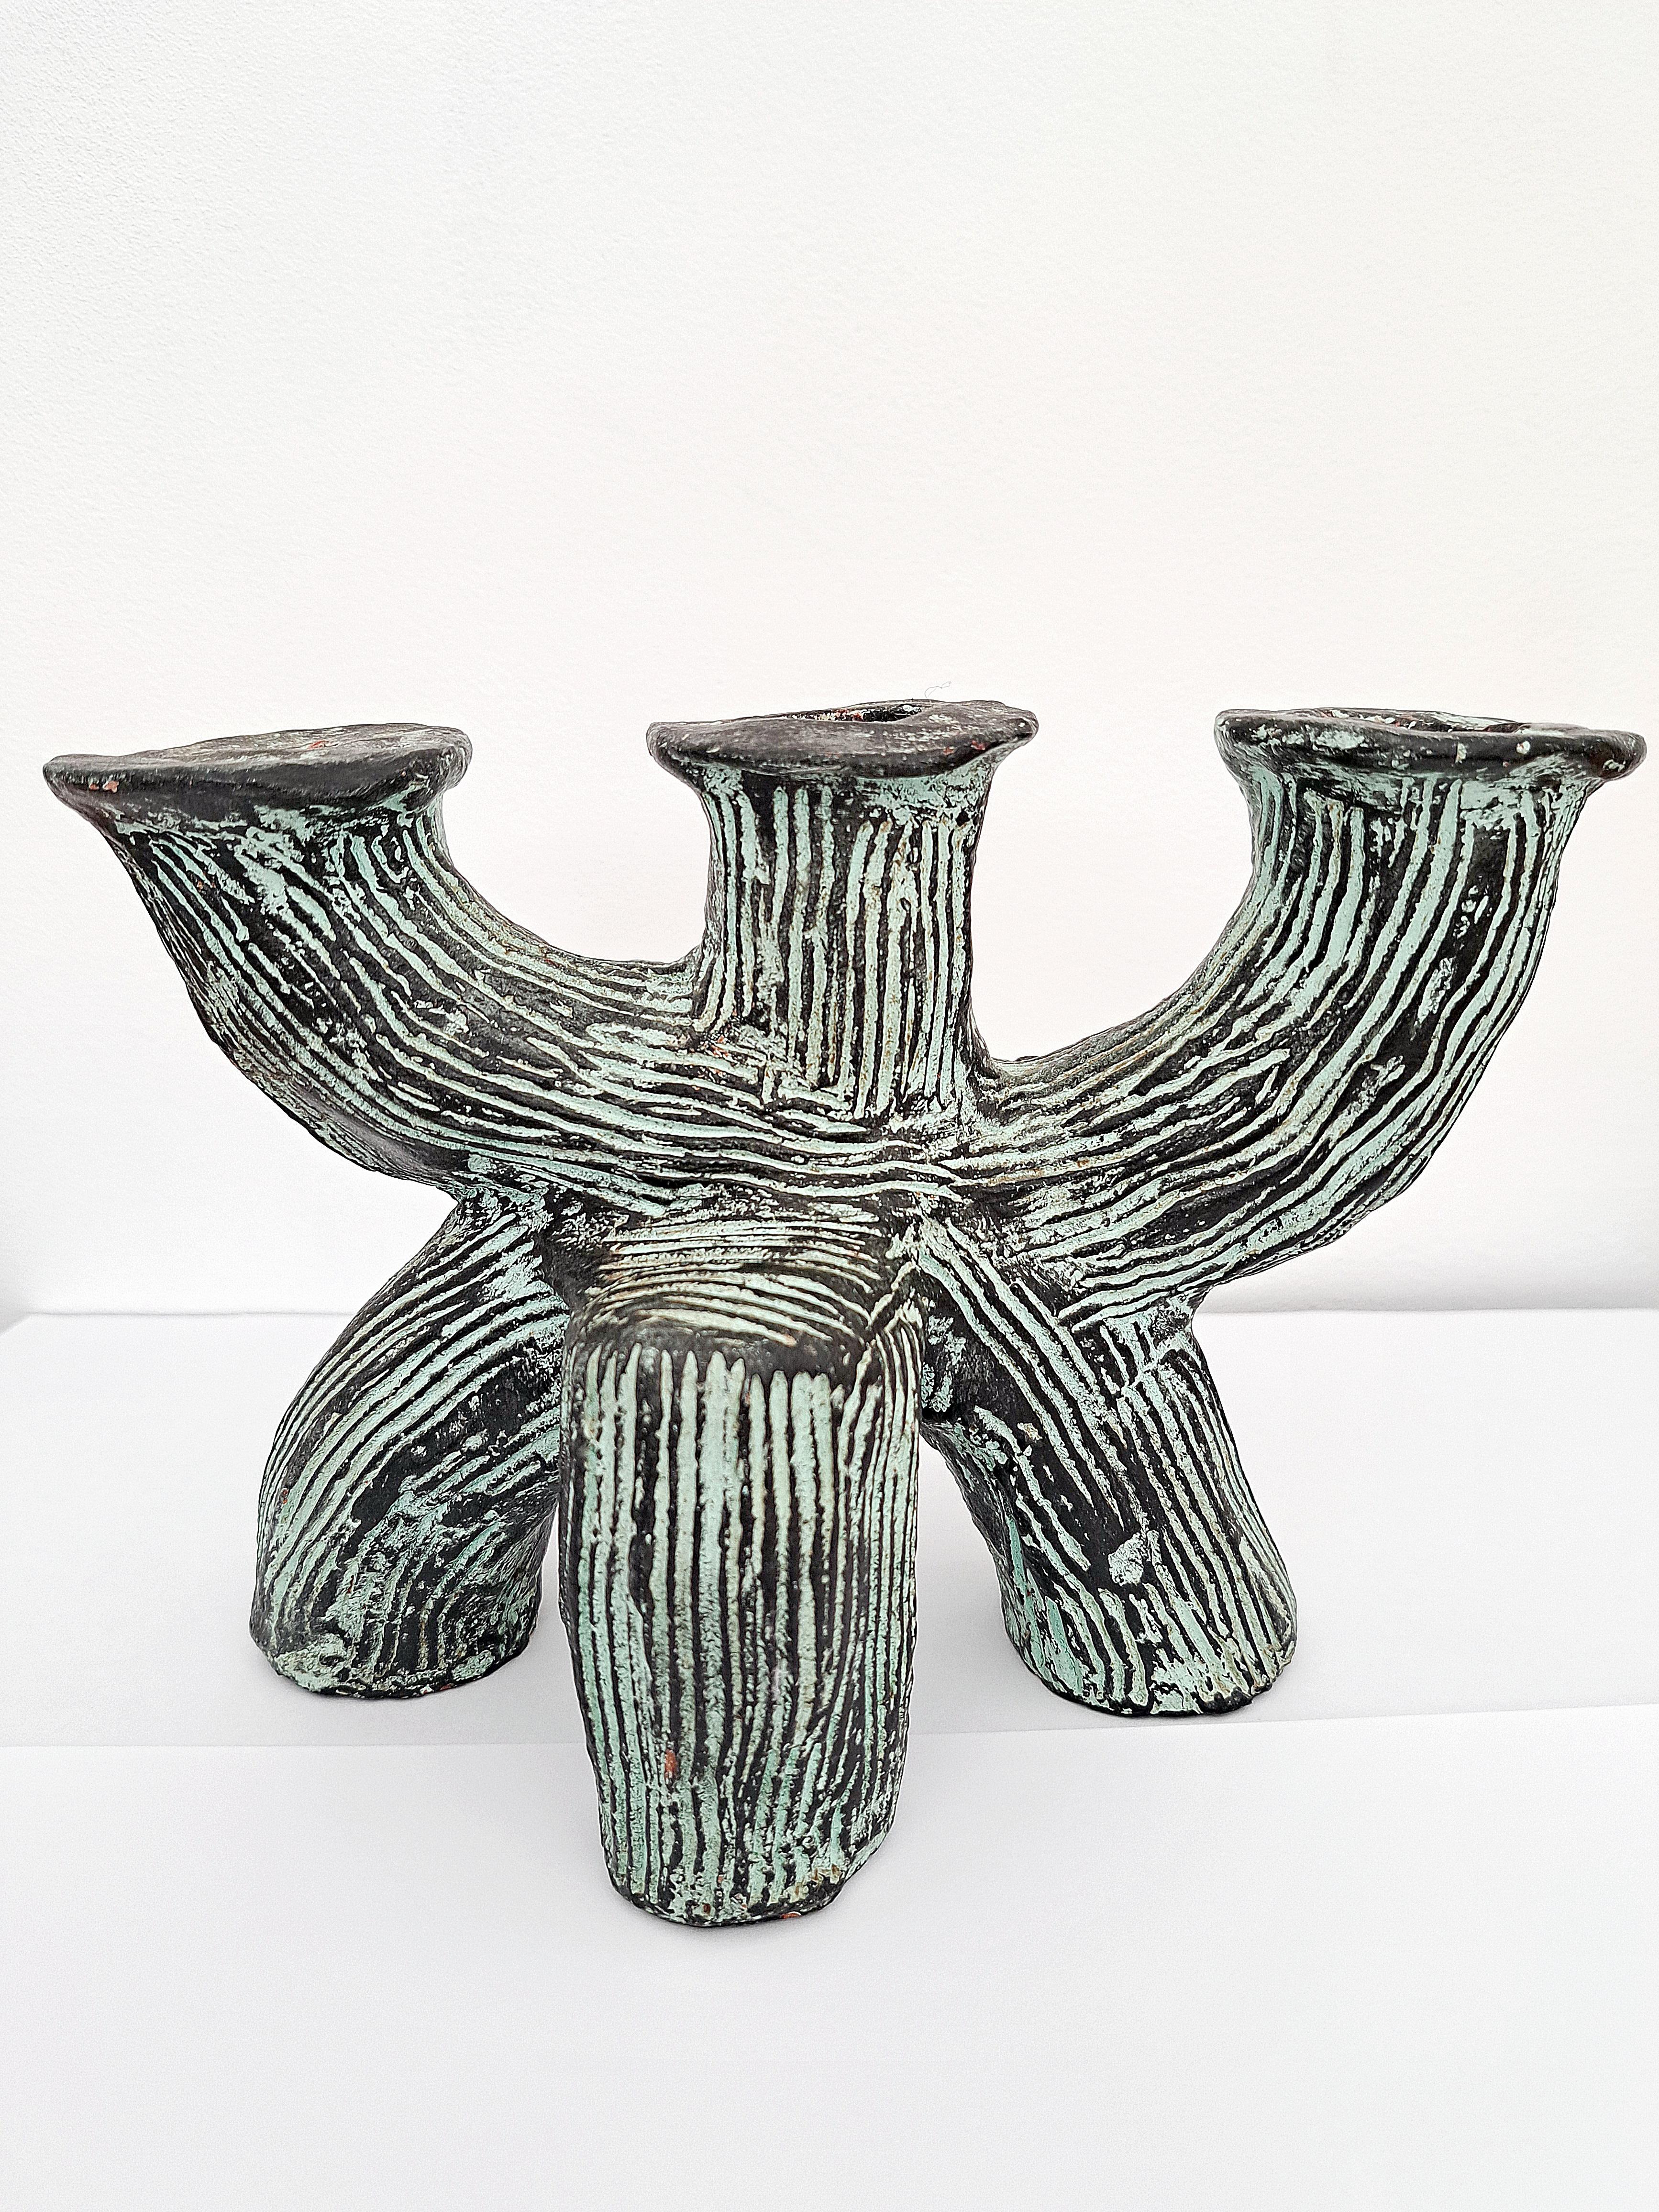 A rather unusual ceramic candelabra/candlestick with 3 arms. Resemble a trunk in a green and black glaze, organic form, designer unknown no mark. Good overall condition no cheap or repairs. France late 20th century.